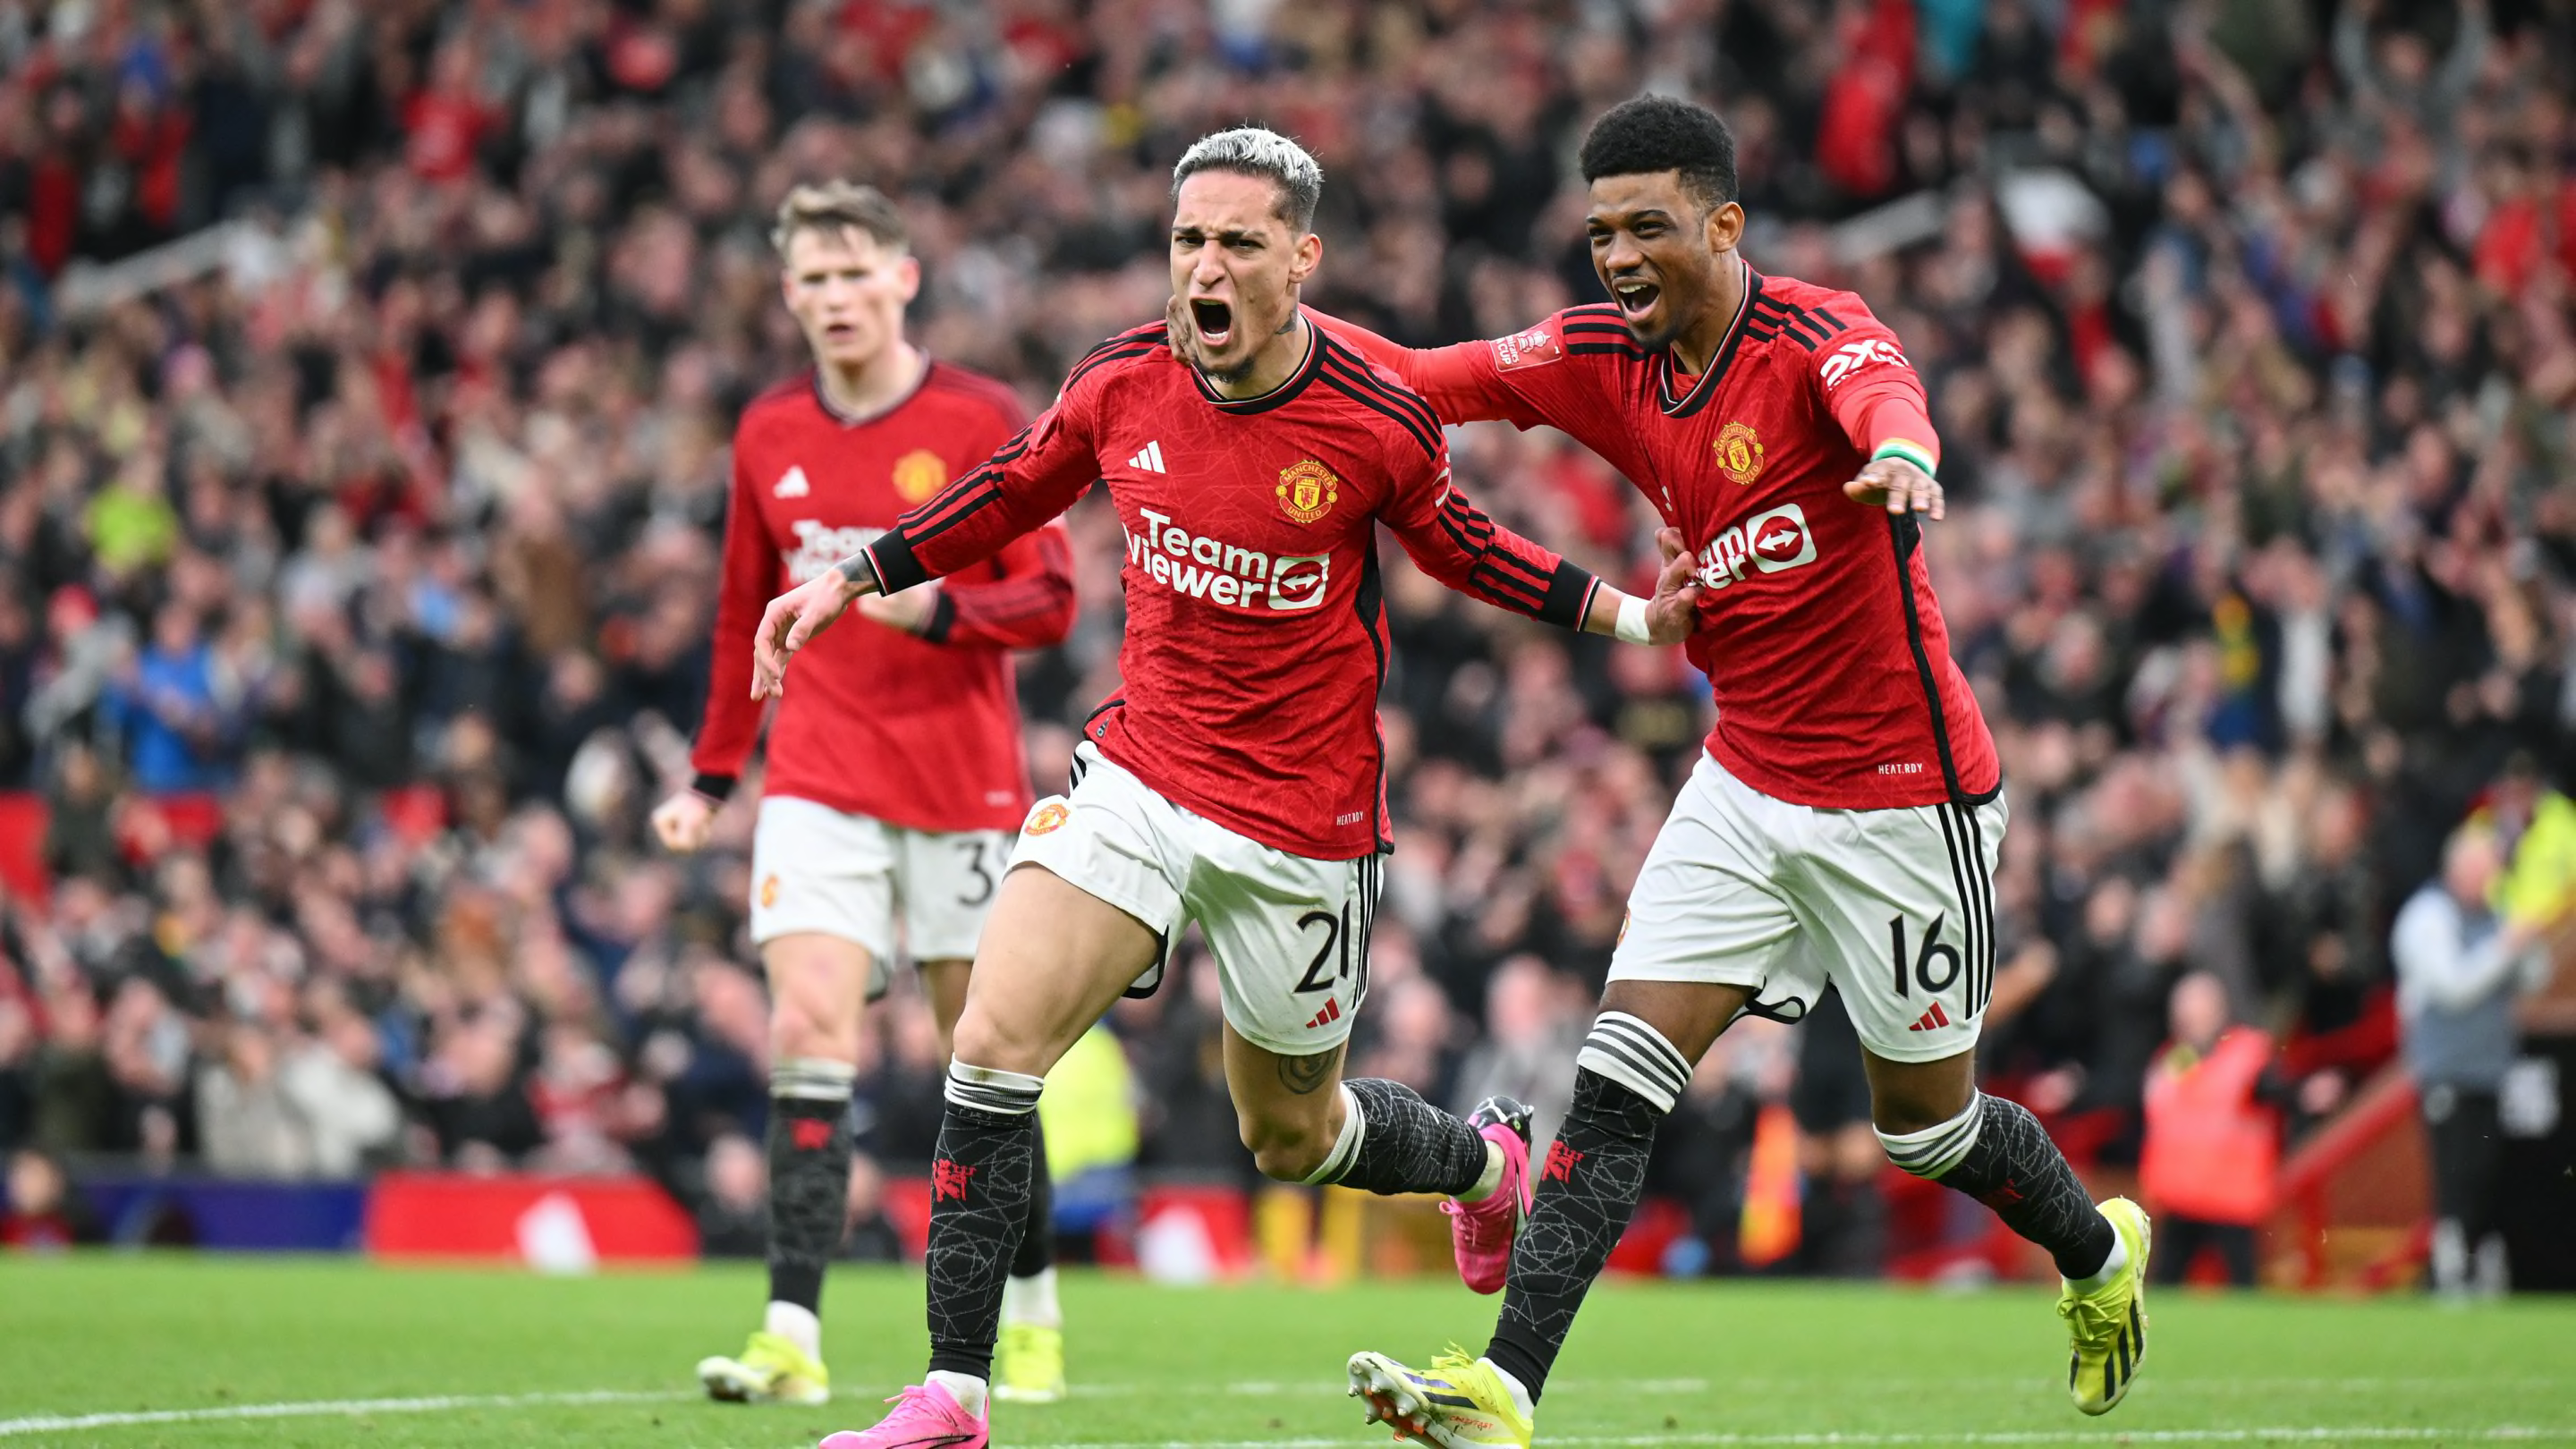 Manchester United stunned Liverpool with late winner in the FA Cup quarterfinals